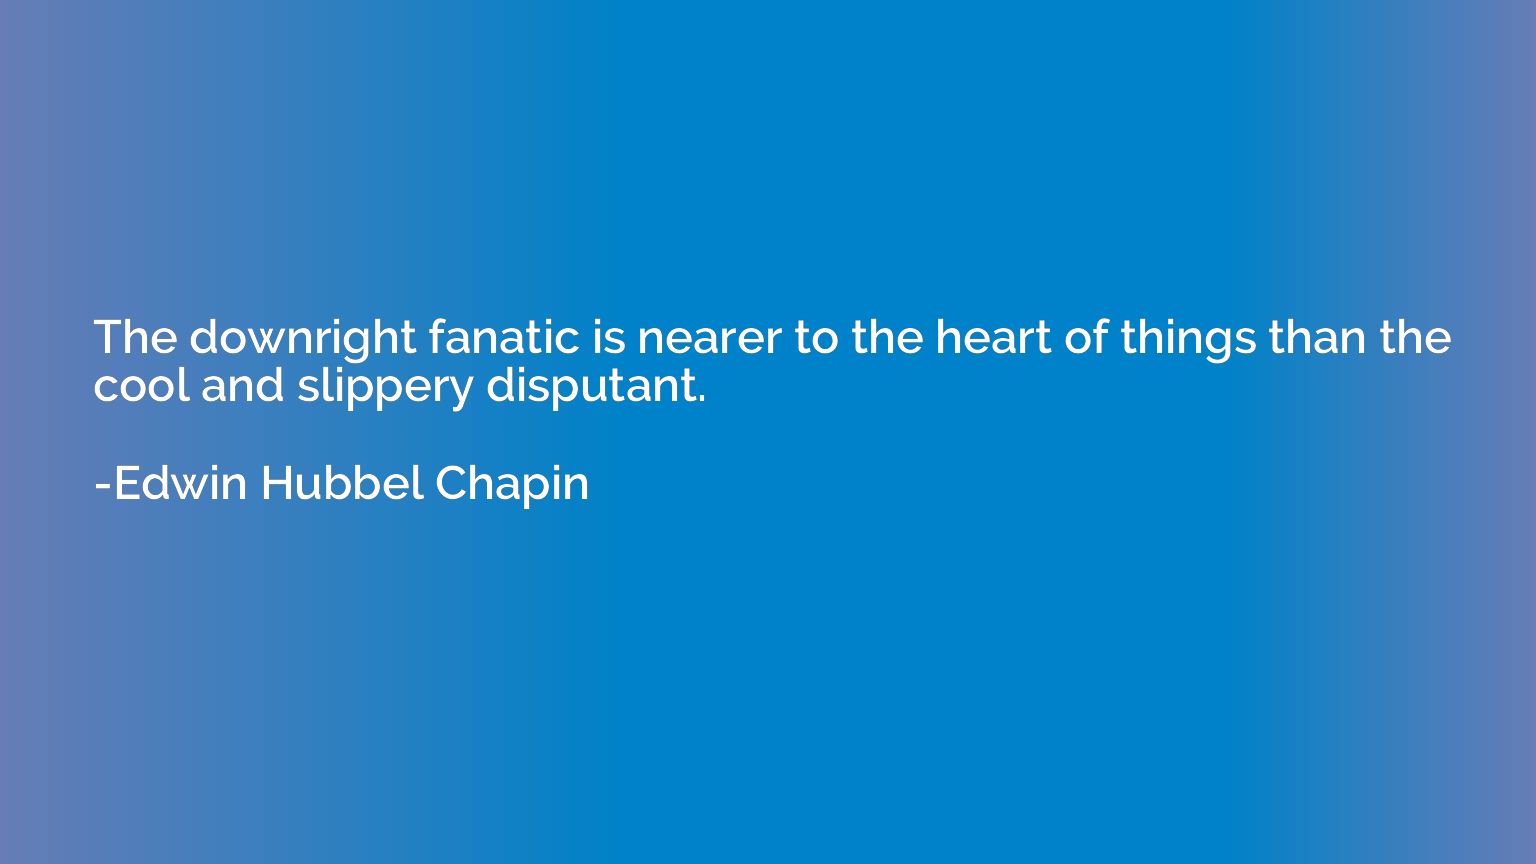 The downright fanatic is nearer to the heart of things than 